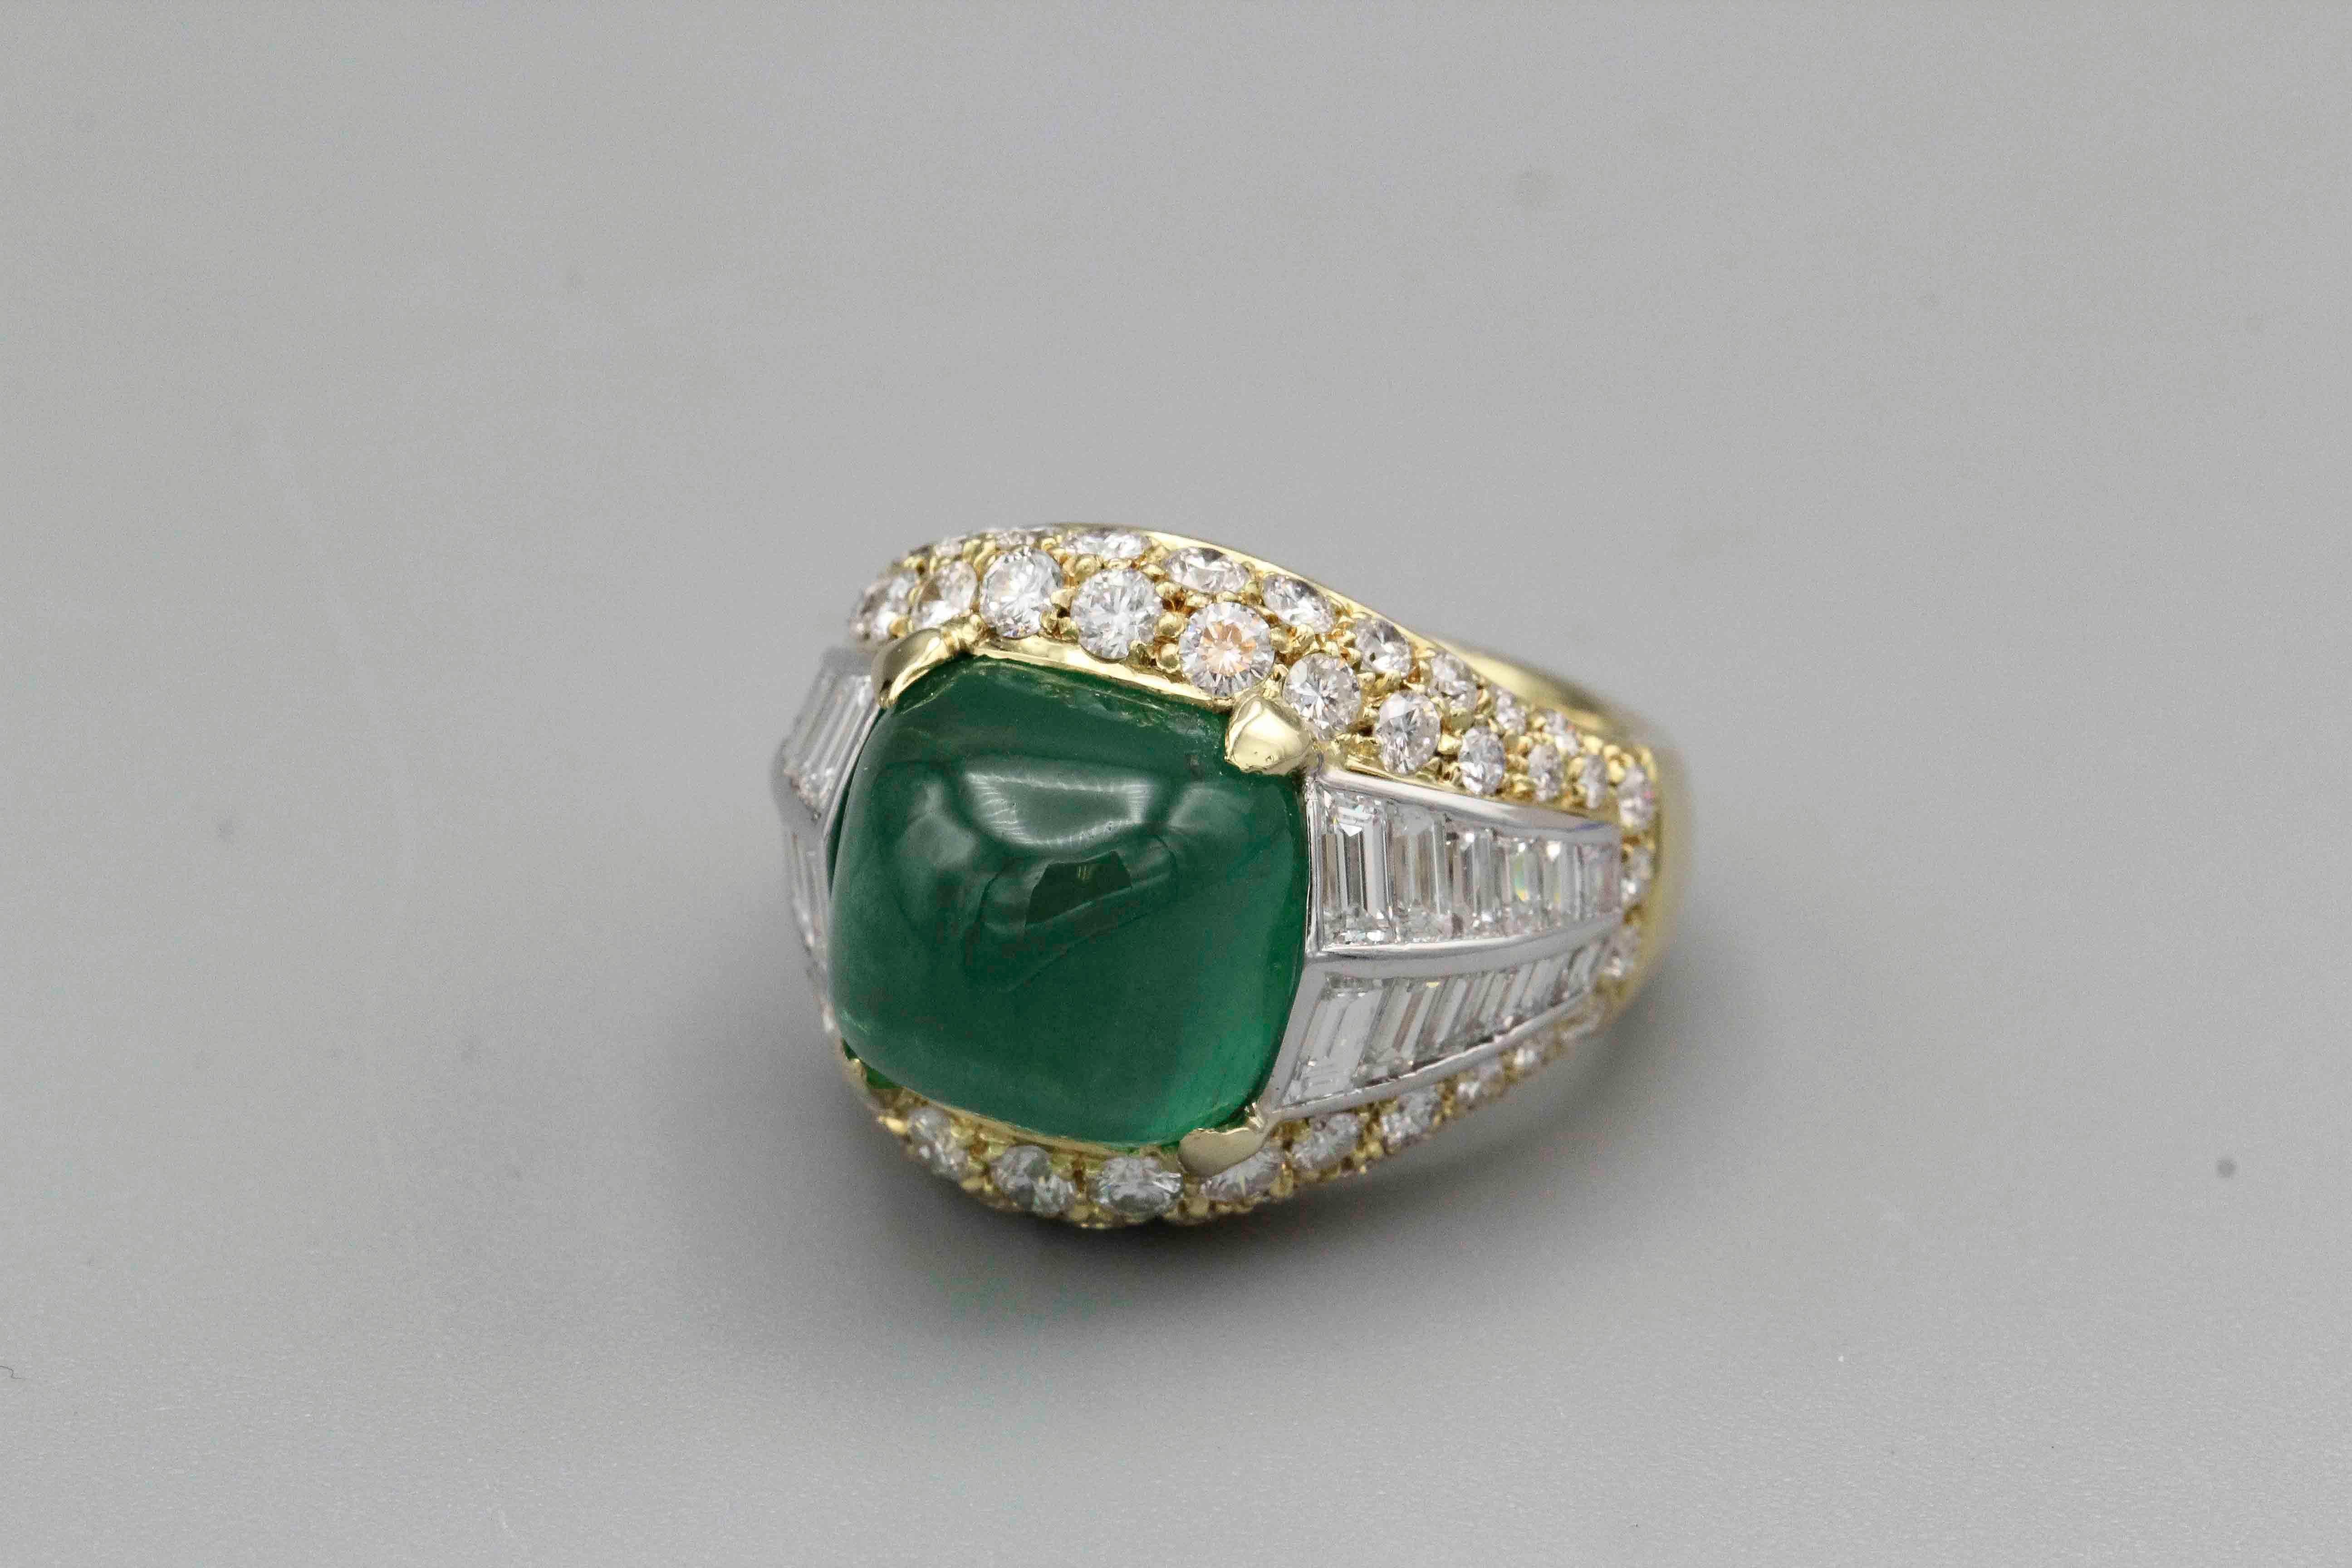 Fine emerald, diamond and 18K gold in the manner of the Bulgari Trombino rings.. It features a beautiful and richly saturated sugarloaf cabochon emerald of over 8 carats in weight; further featuring high grade round brilliant cut and baguette cut